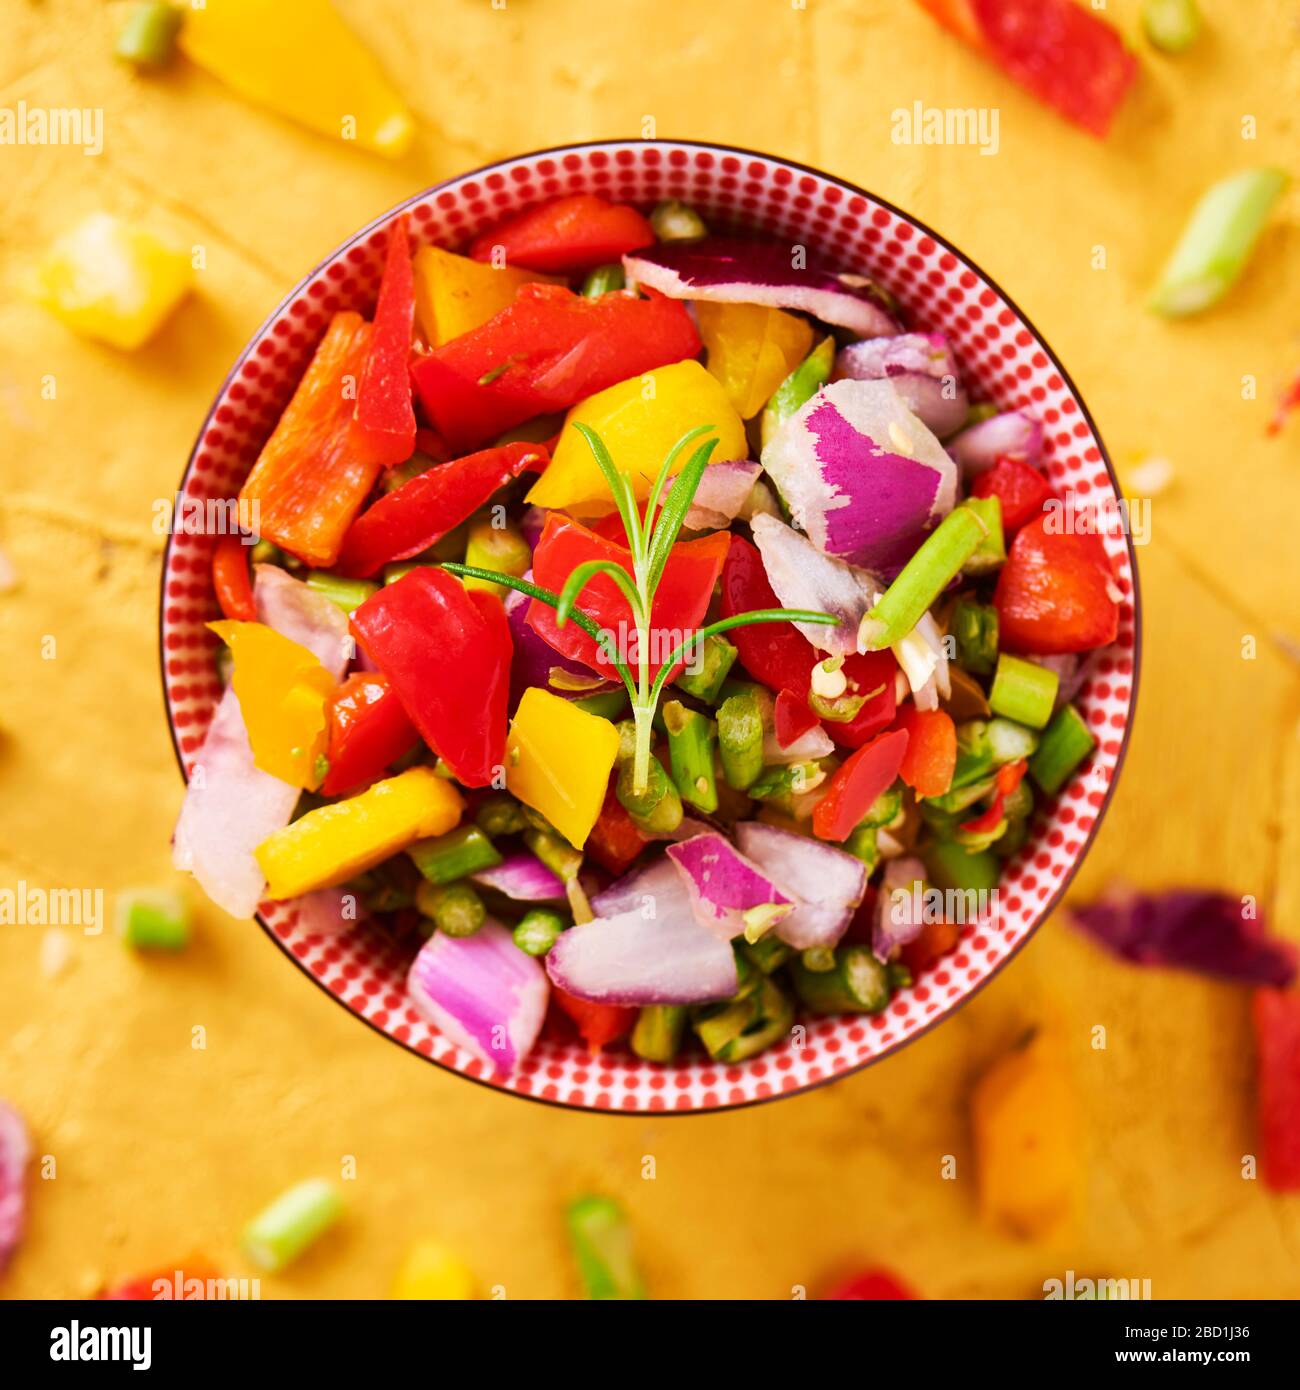 high angle view of a bowl with a mix of different raw chopped vegetables, such as asparagus, onion, or yellow and red bell pepper, on a golden texture Stock Photo